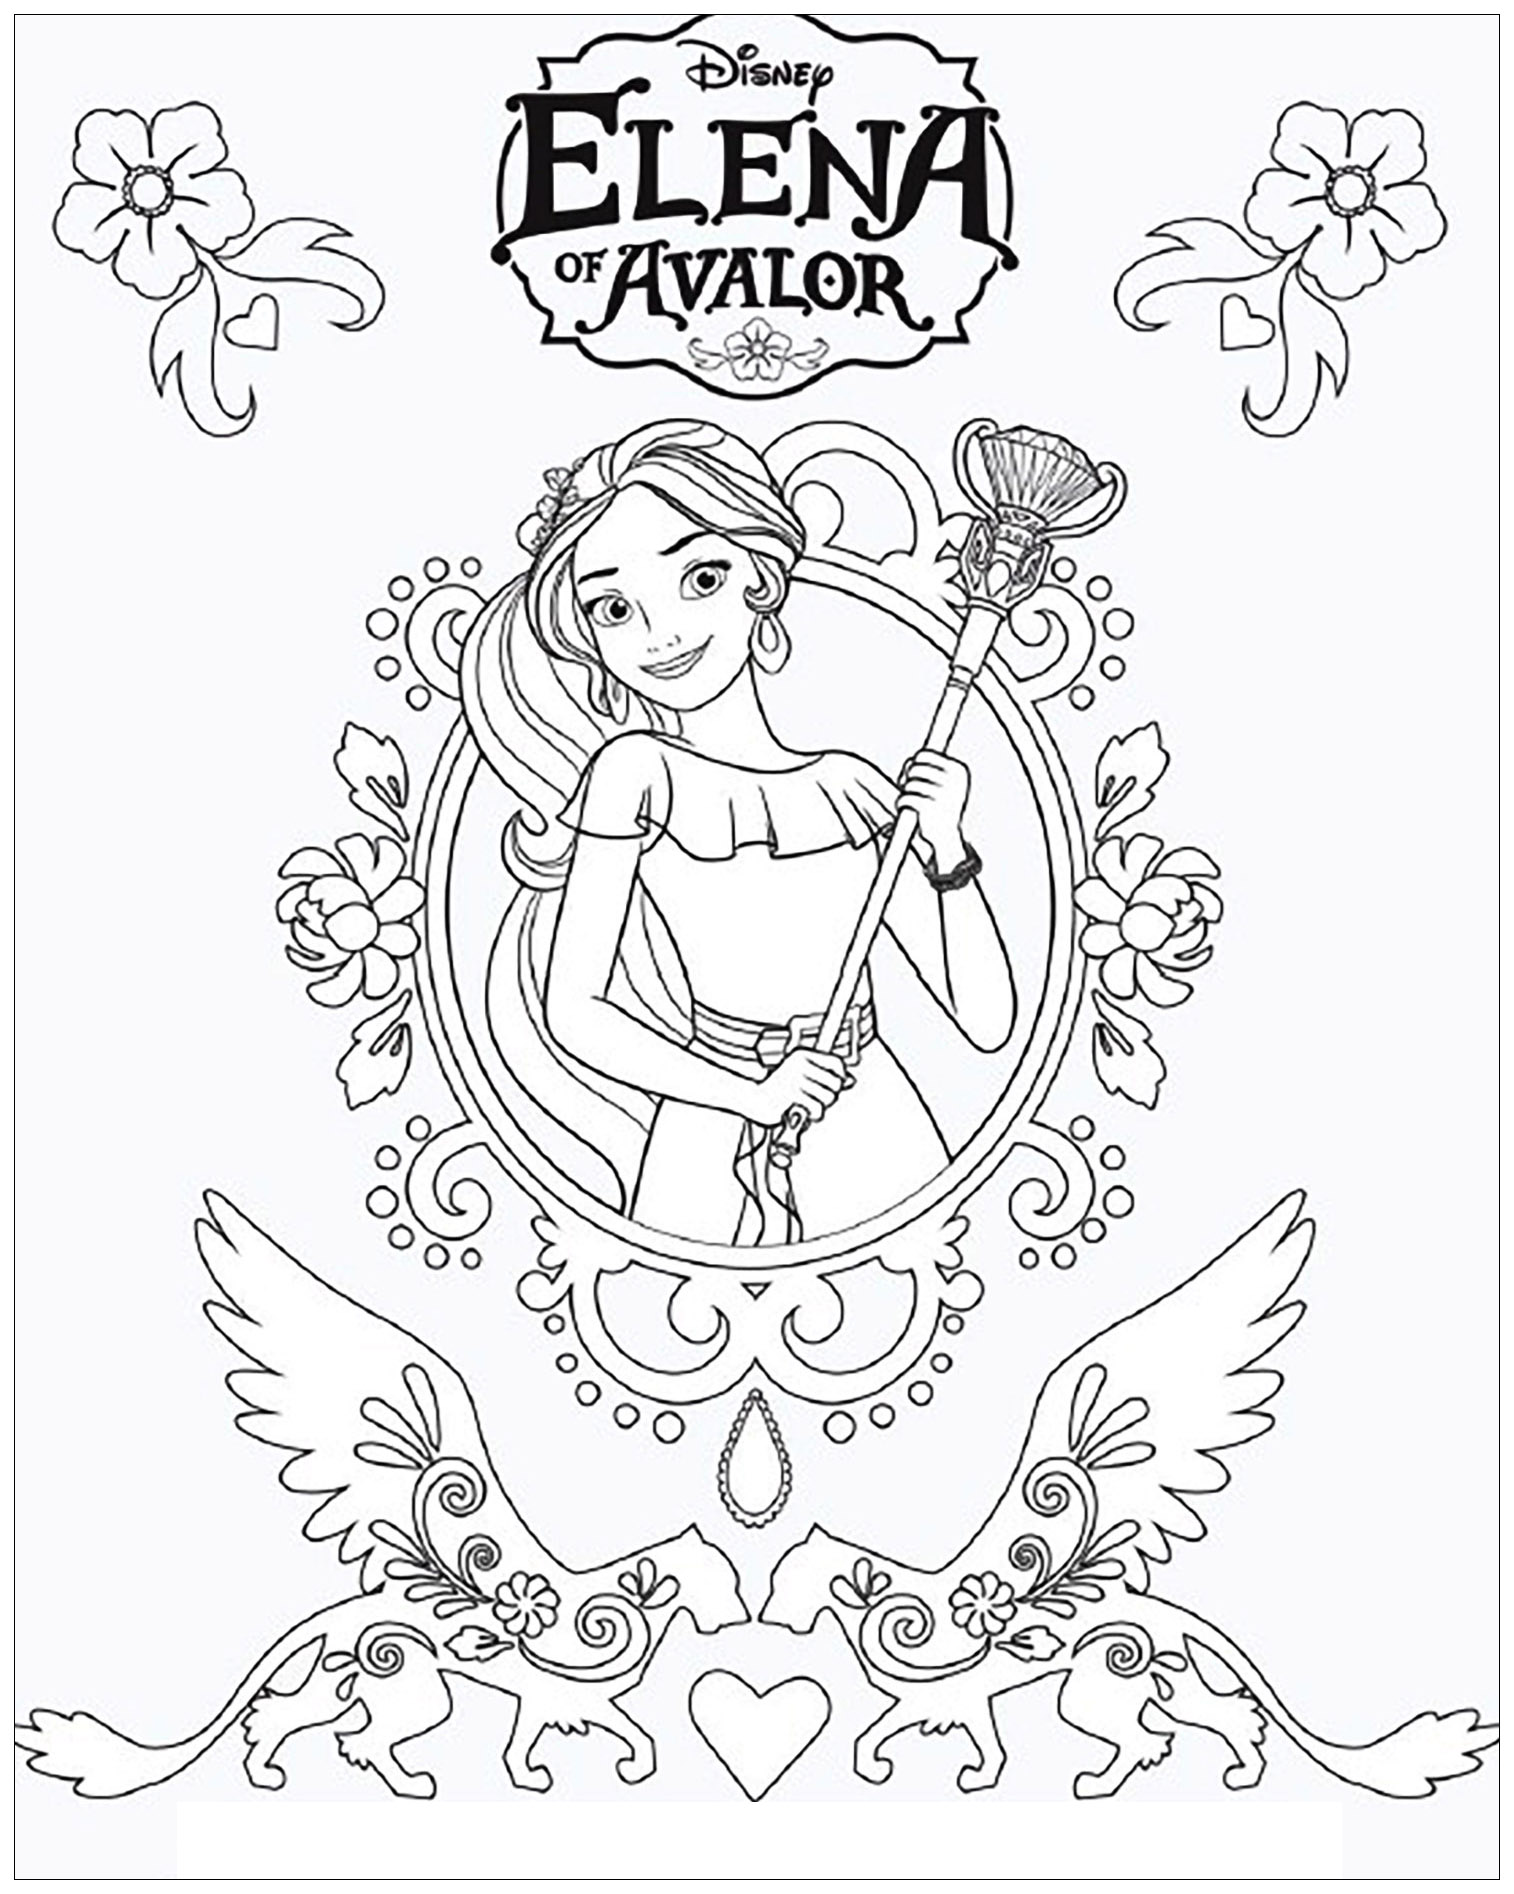 Elena Avalor coloring pages to download - Elena Avalor Kids Coloring Pages